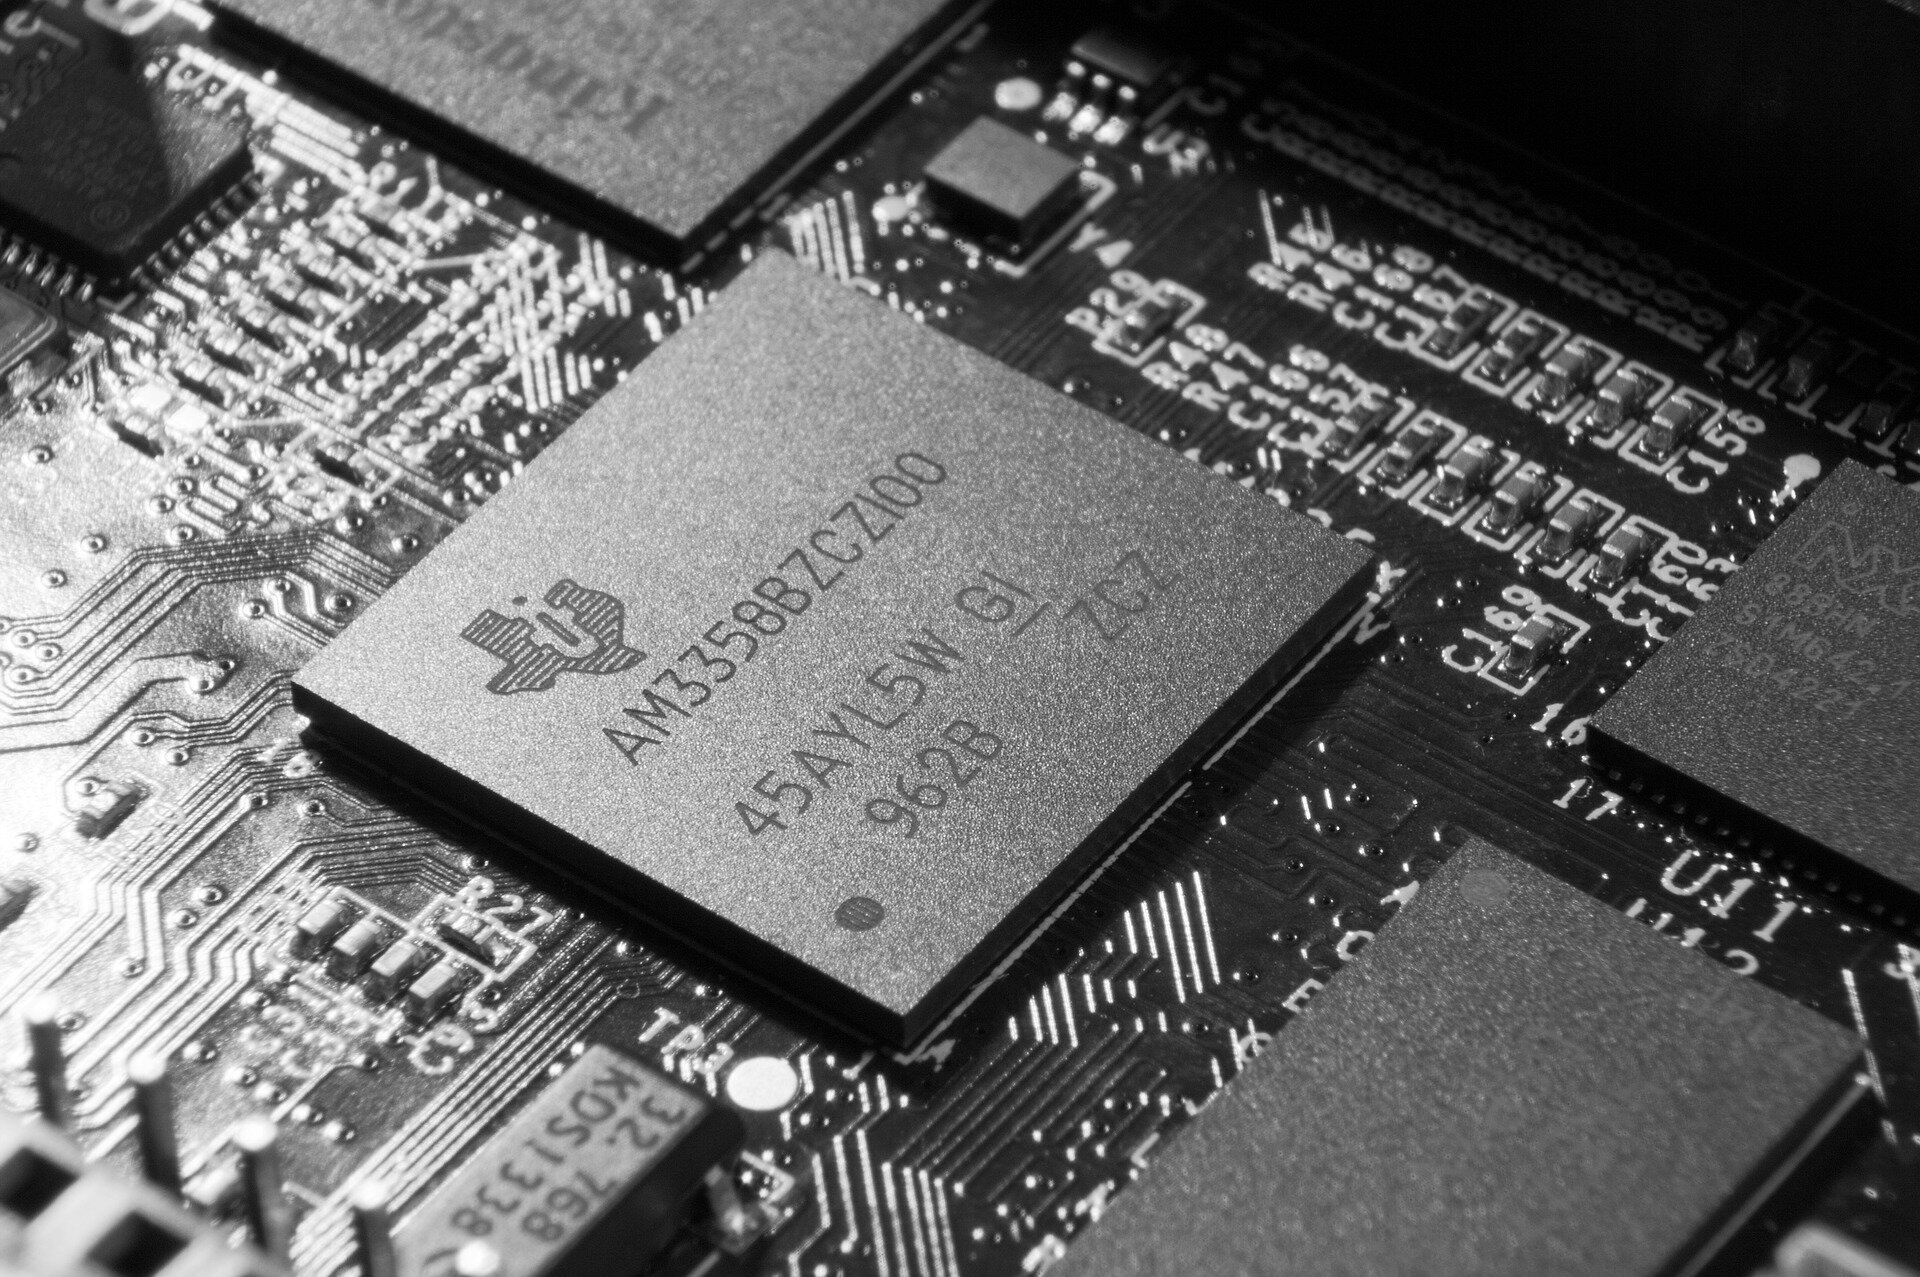 Texas Instruments to build new $11 billion semiconductor plant in Utah